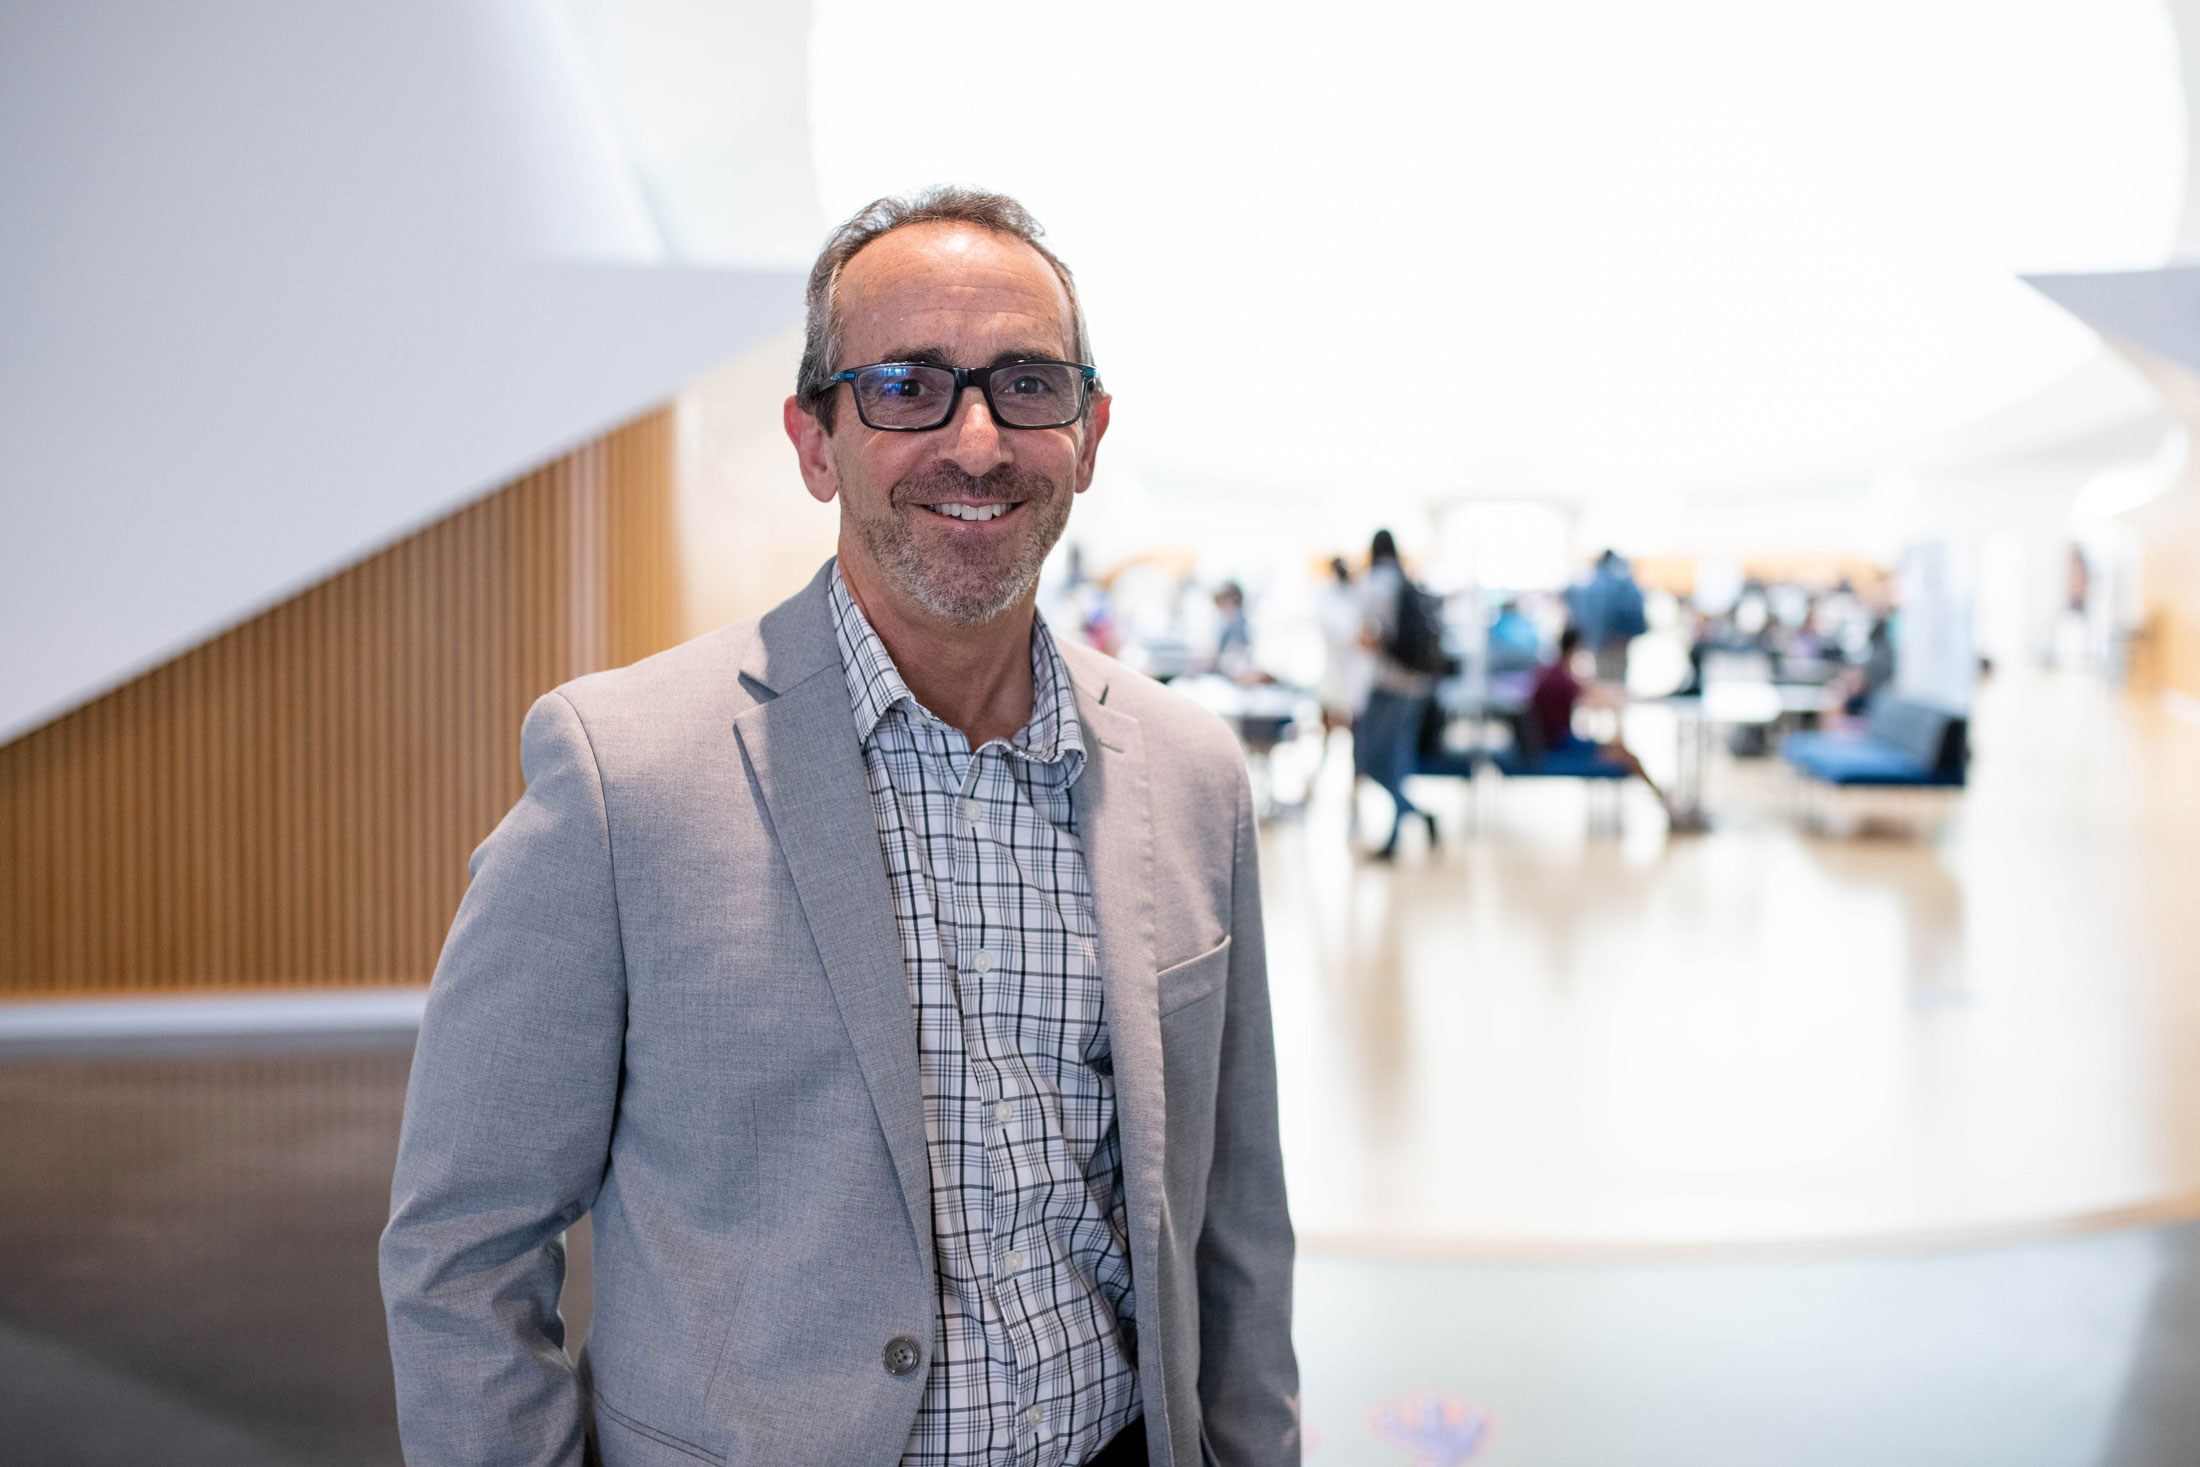 Dr. Michael Brilleslyper is the new chair of Florida Polytechnic University’s Department of Applied Mathematics.